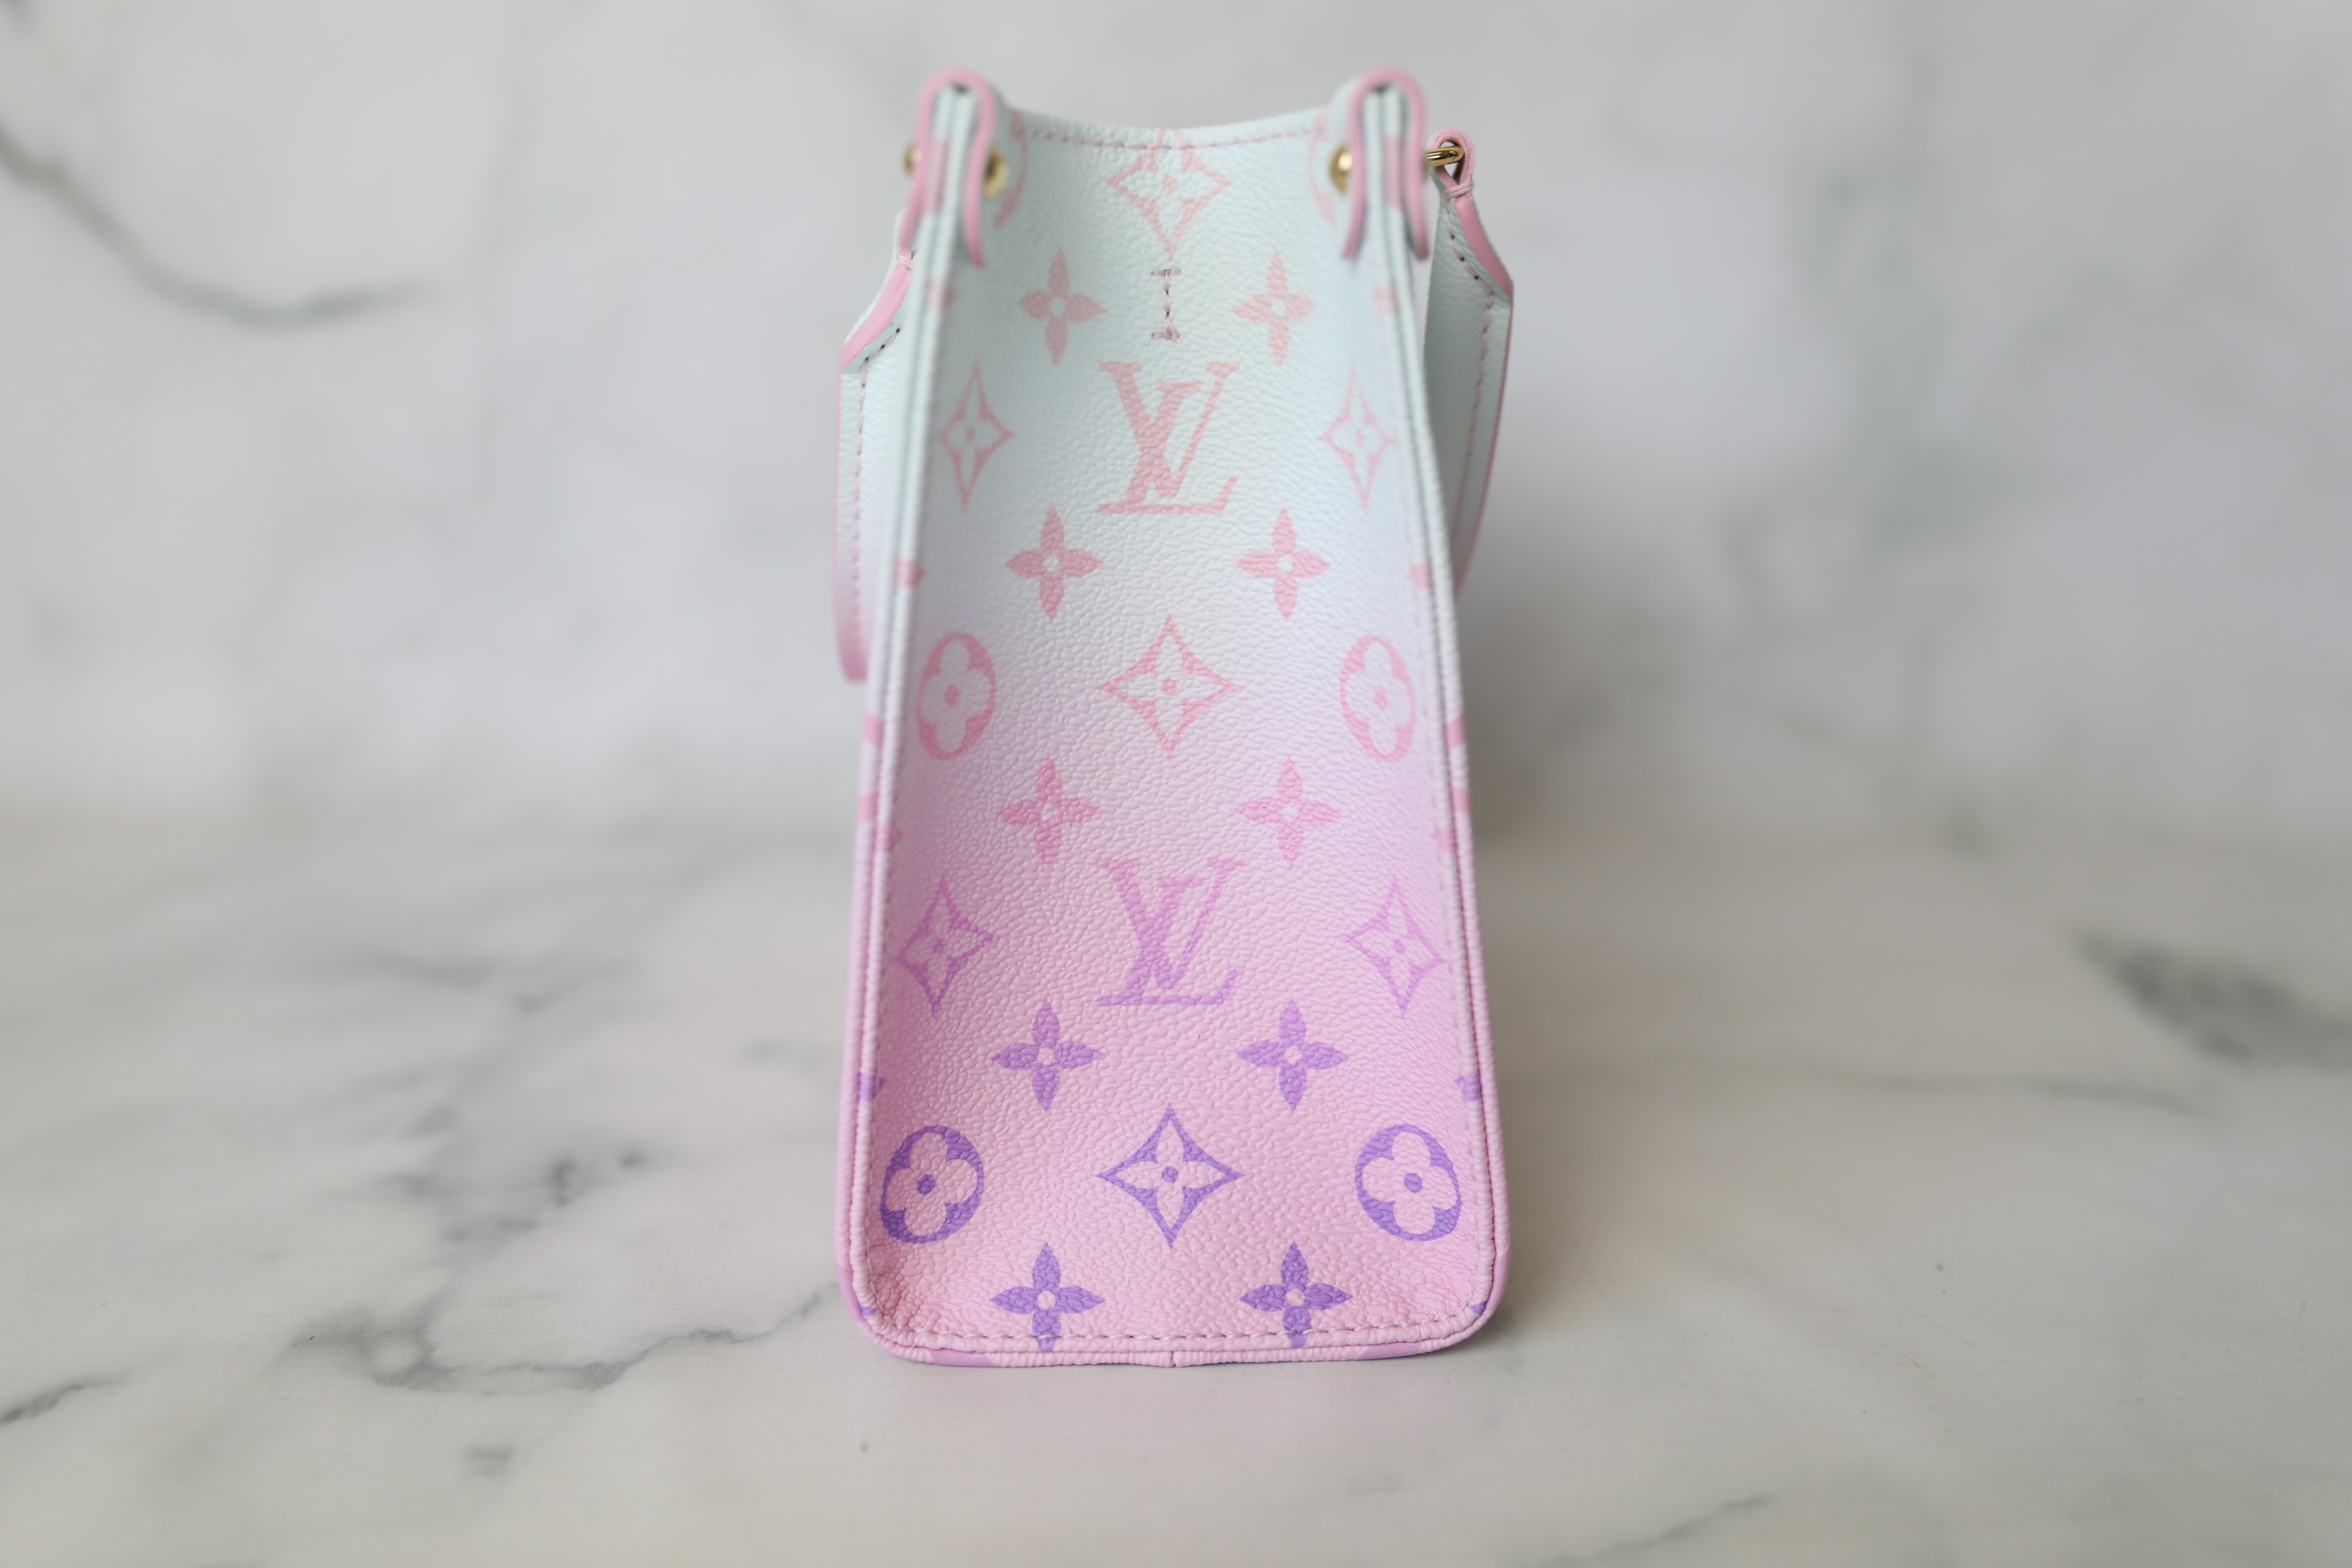 Louis Vuitton OnTheGo PM, Sunrise Pastel Canvas, New in Dustbag